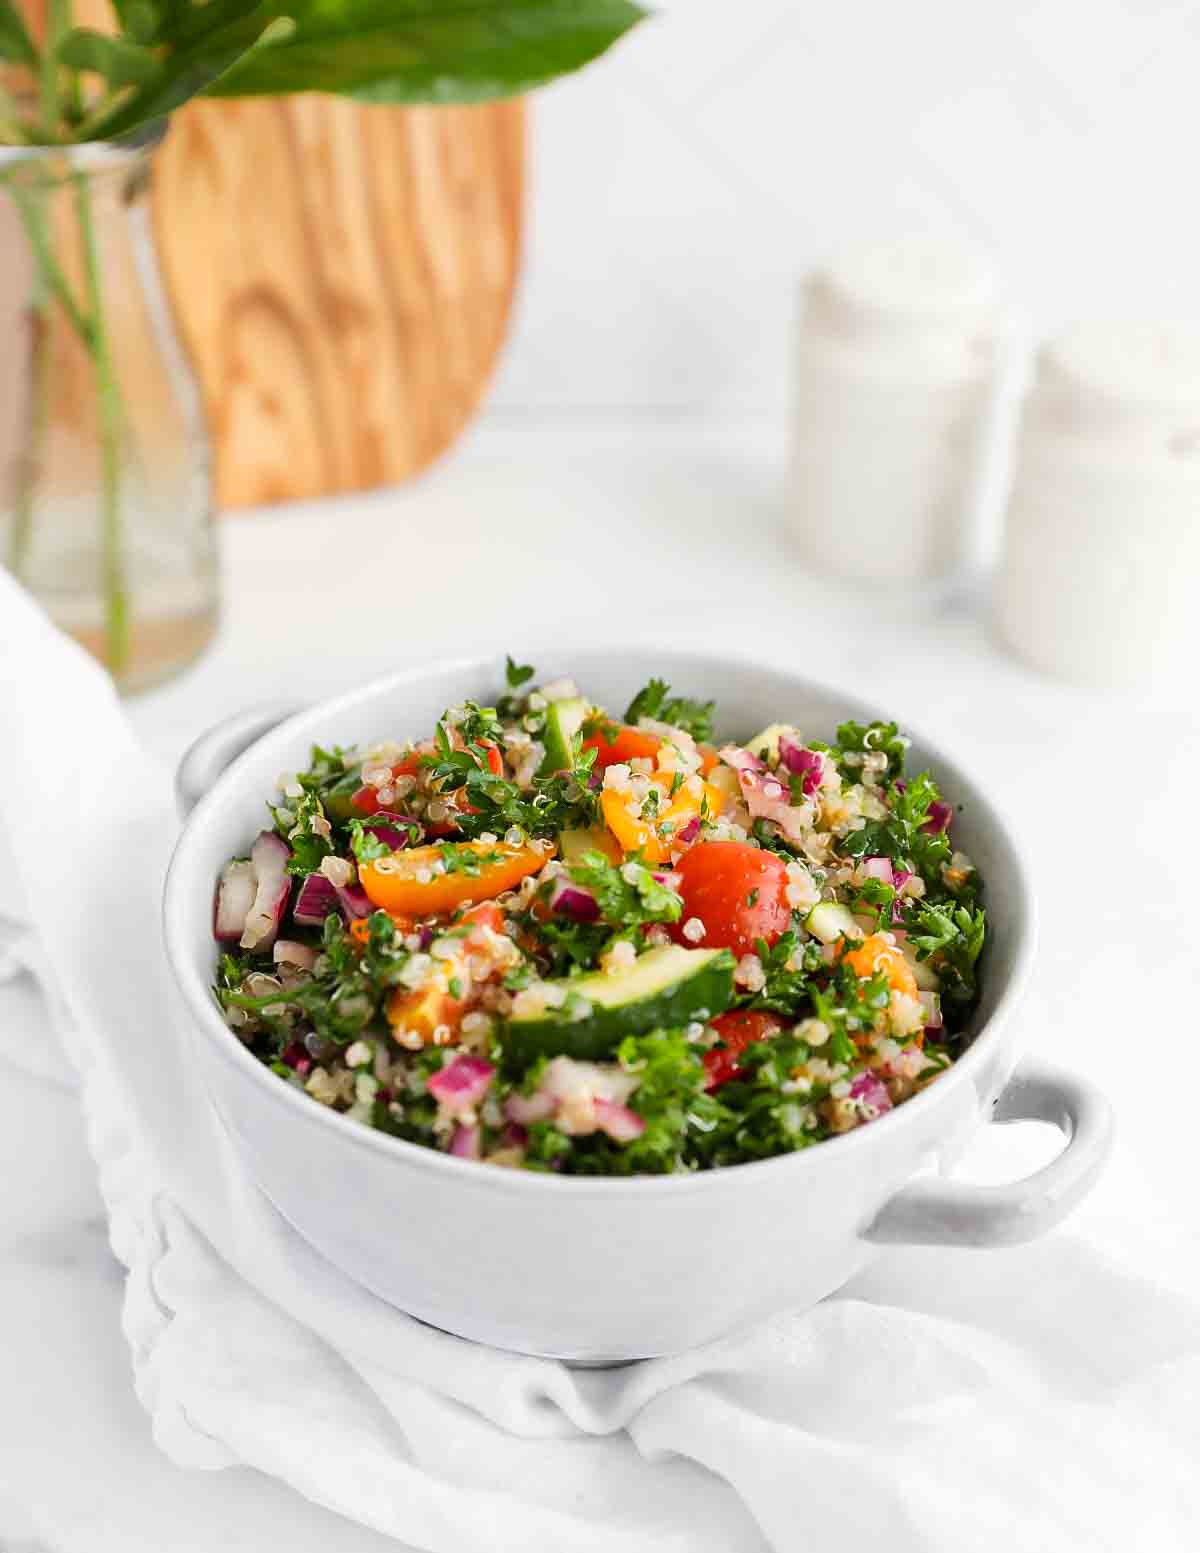 An image of tabouli including colorful tomatoes, parsley, cucumbers, onion, and quinoa